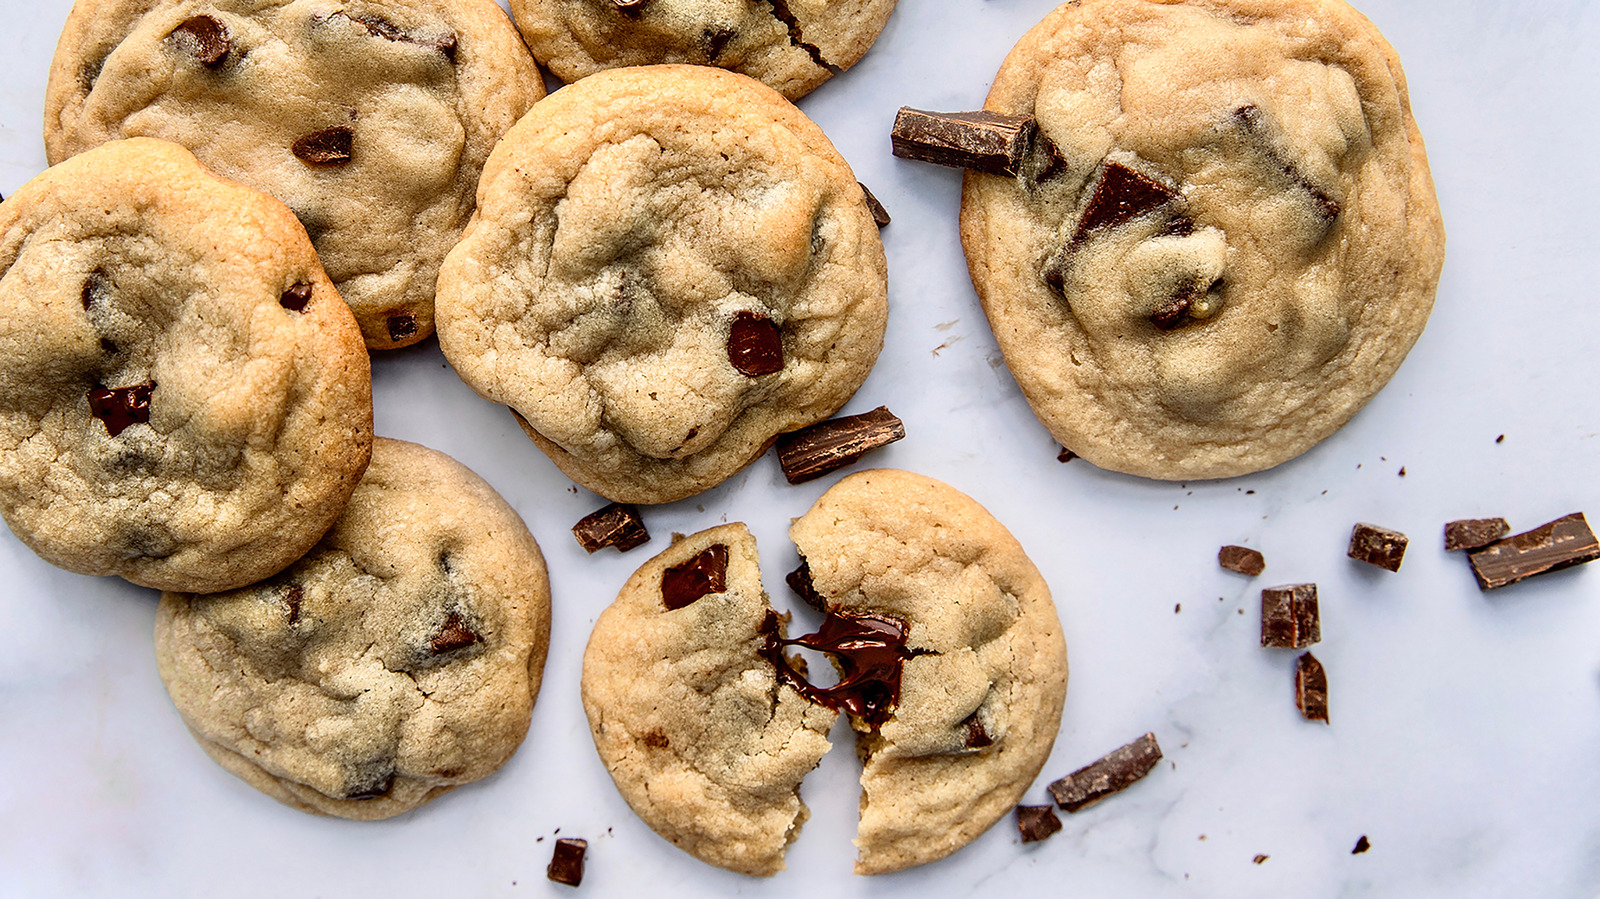 https://www.tastingtable.com/img/gallery/what-will-an-extra-egg-yolk-do-to-your-chocolate-chip-cookies/l-intro-1642547059.jpg